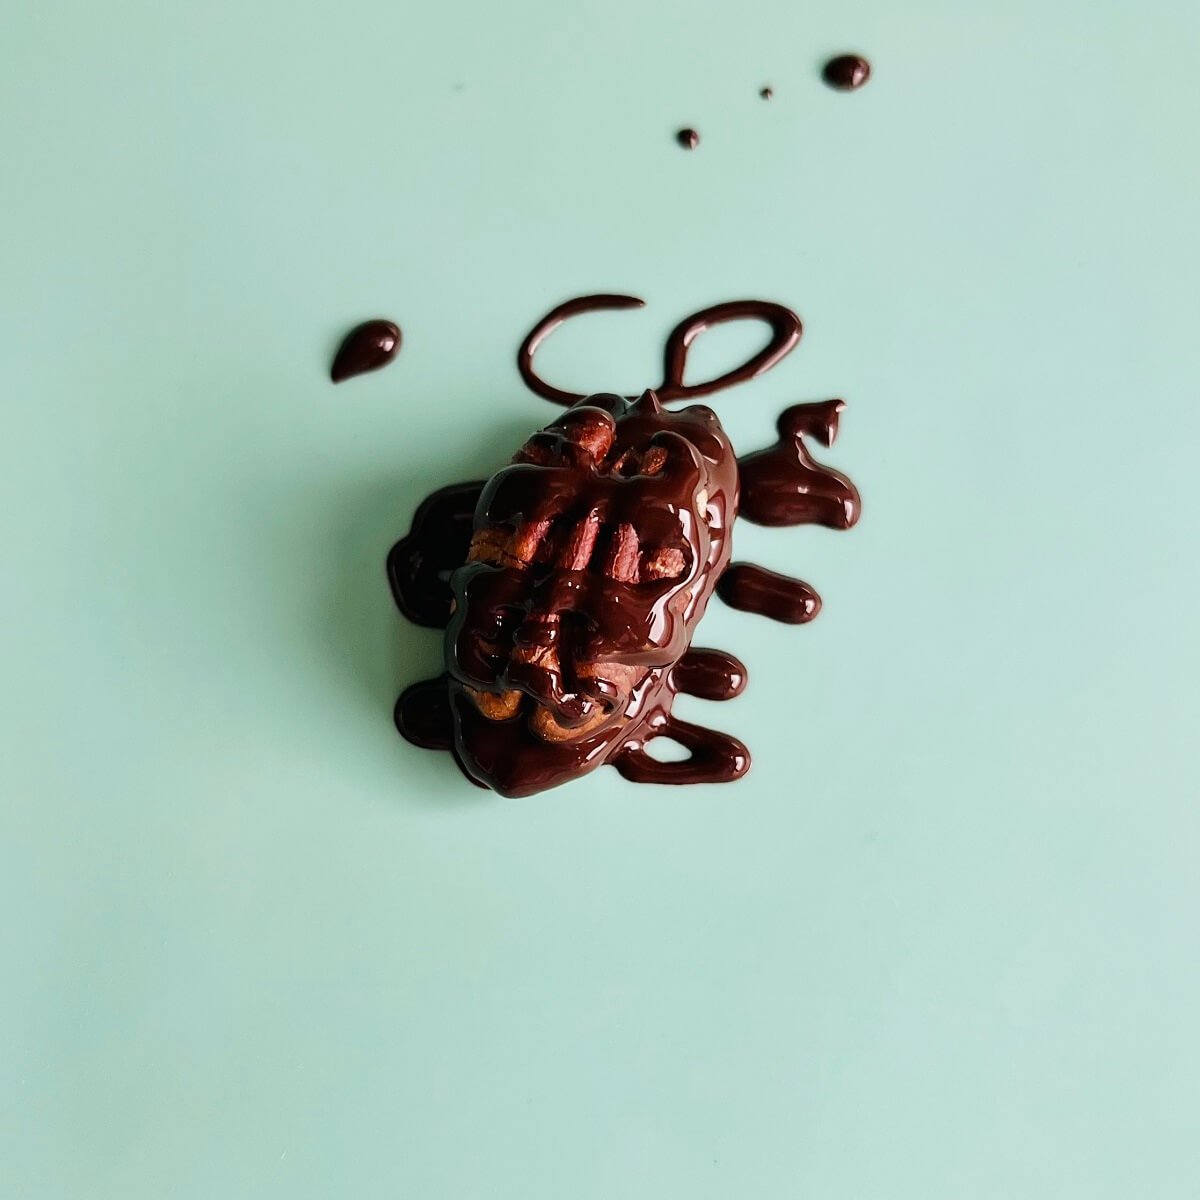 A chocolate drizzled pecan on a turquoise silicone baking mat.